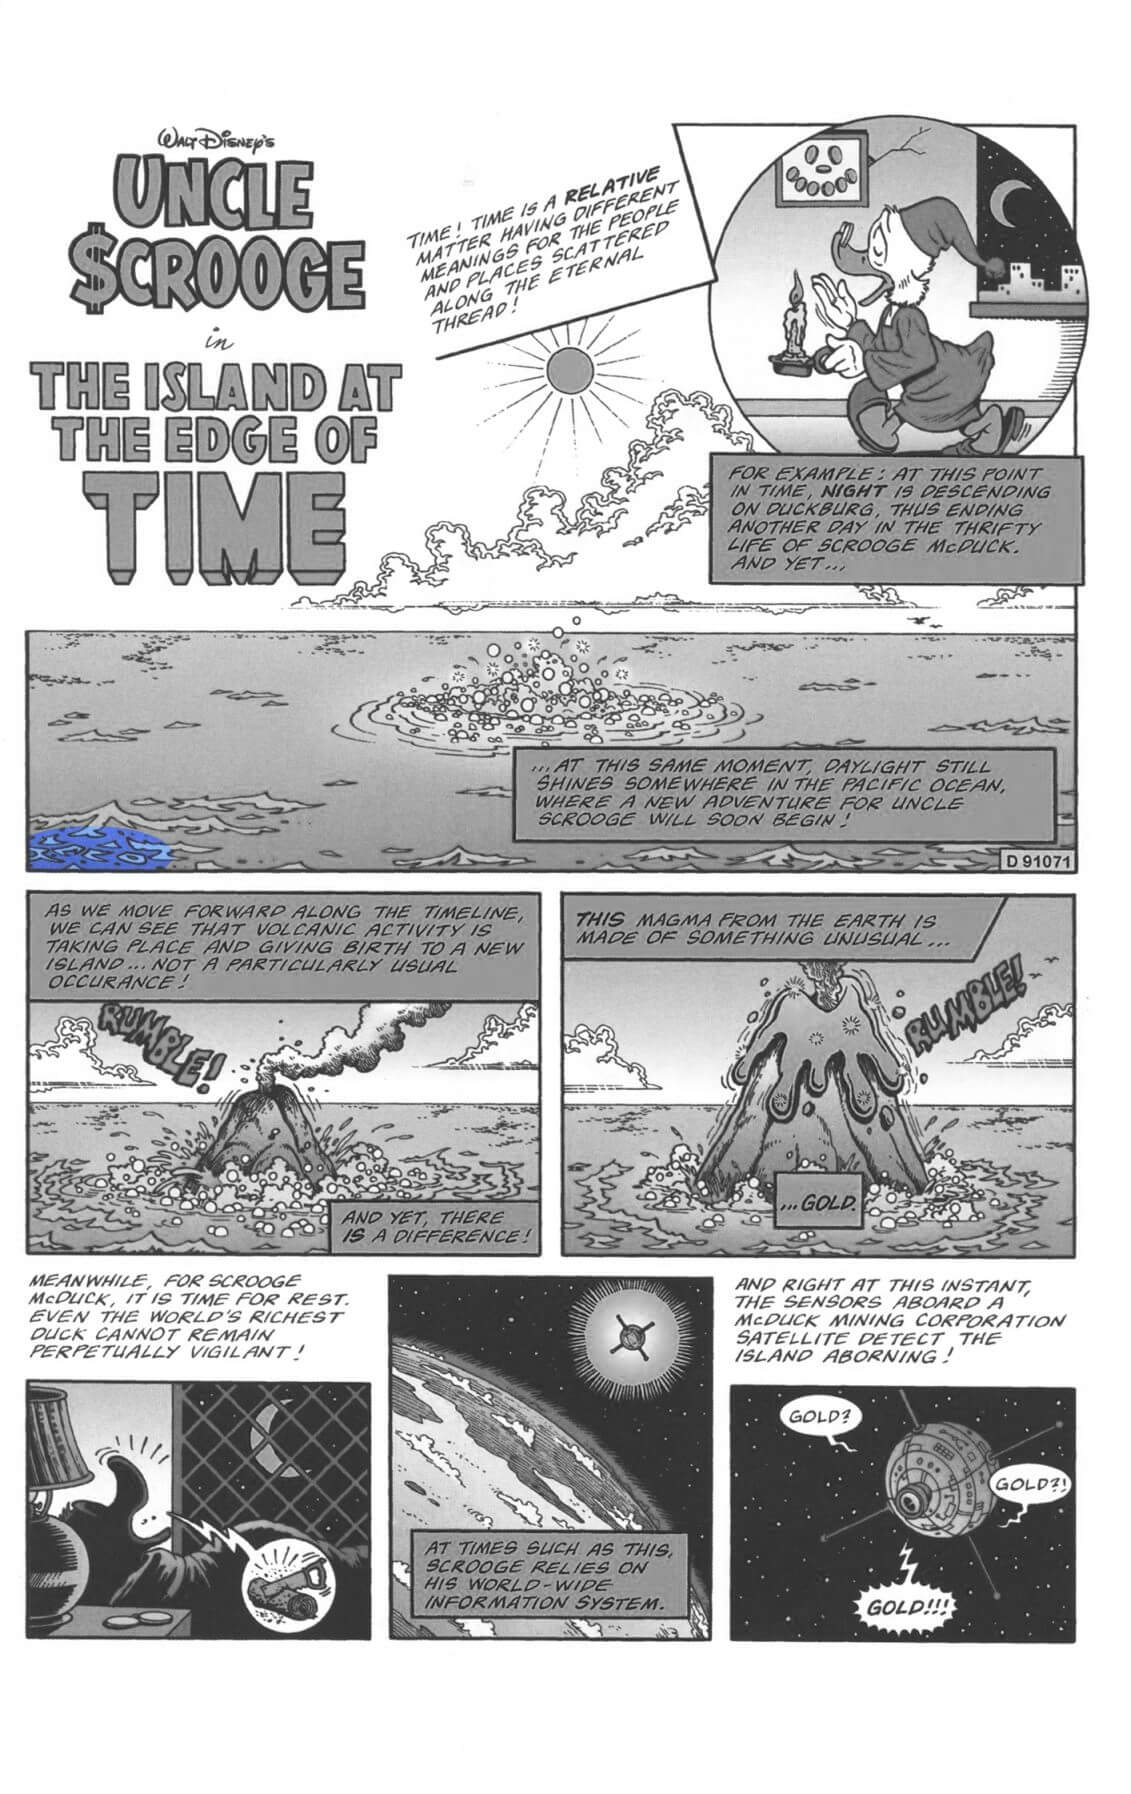 D.U.C.K in The Island at the Edge of Time first page